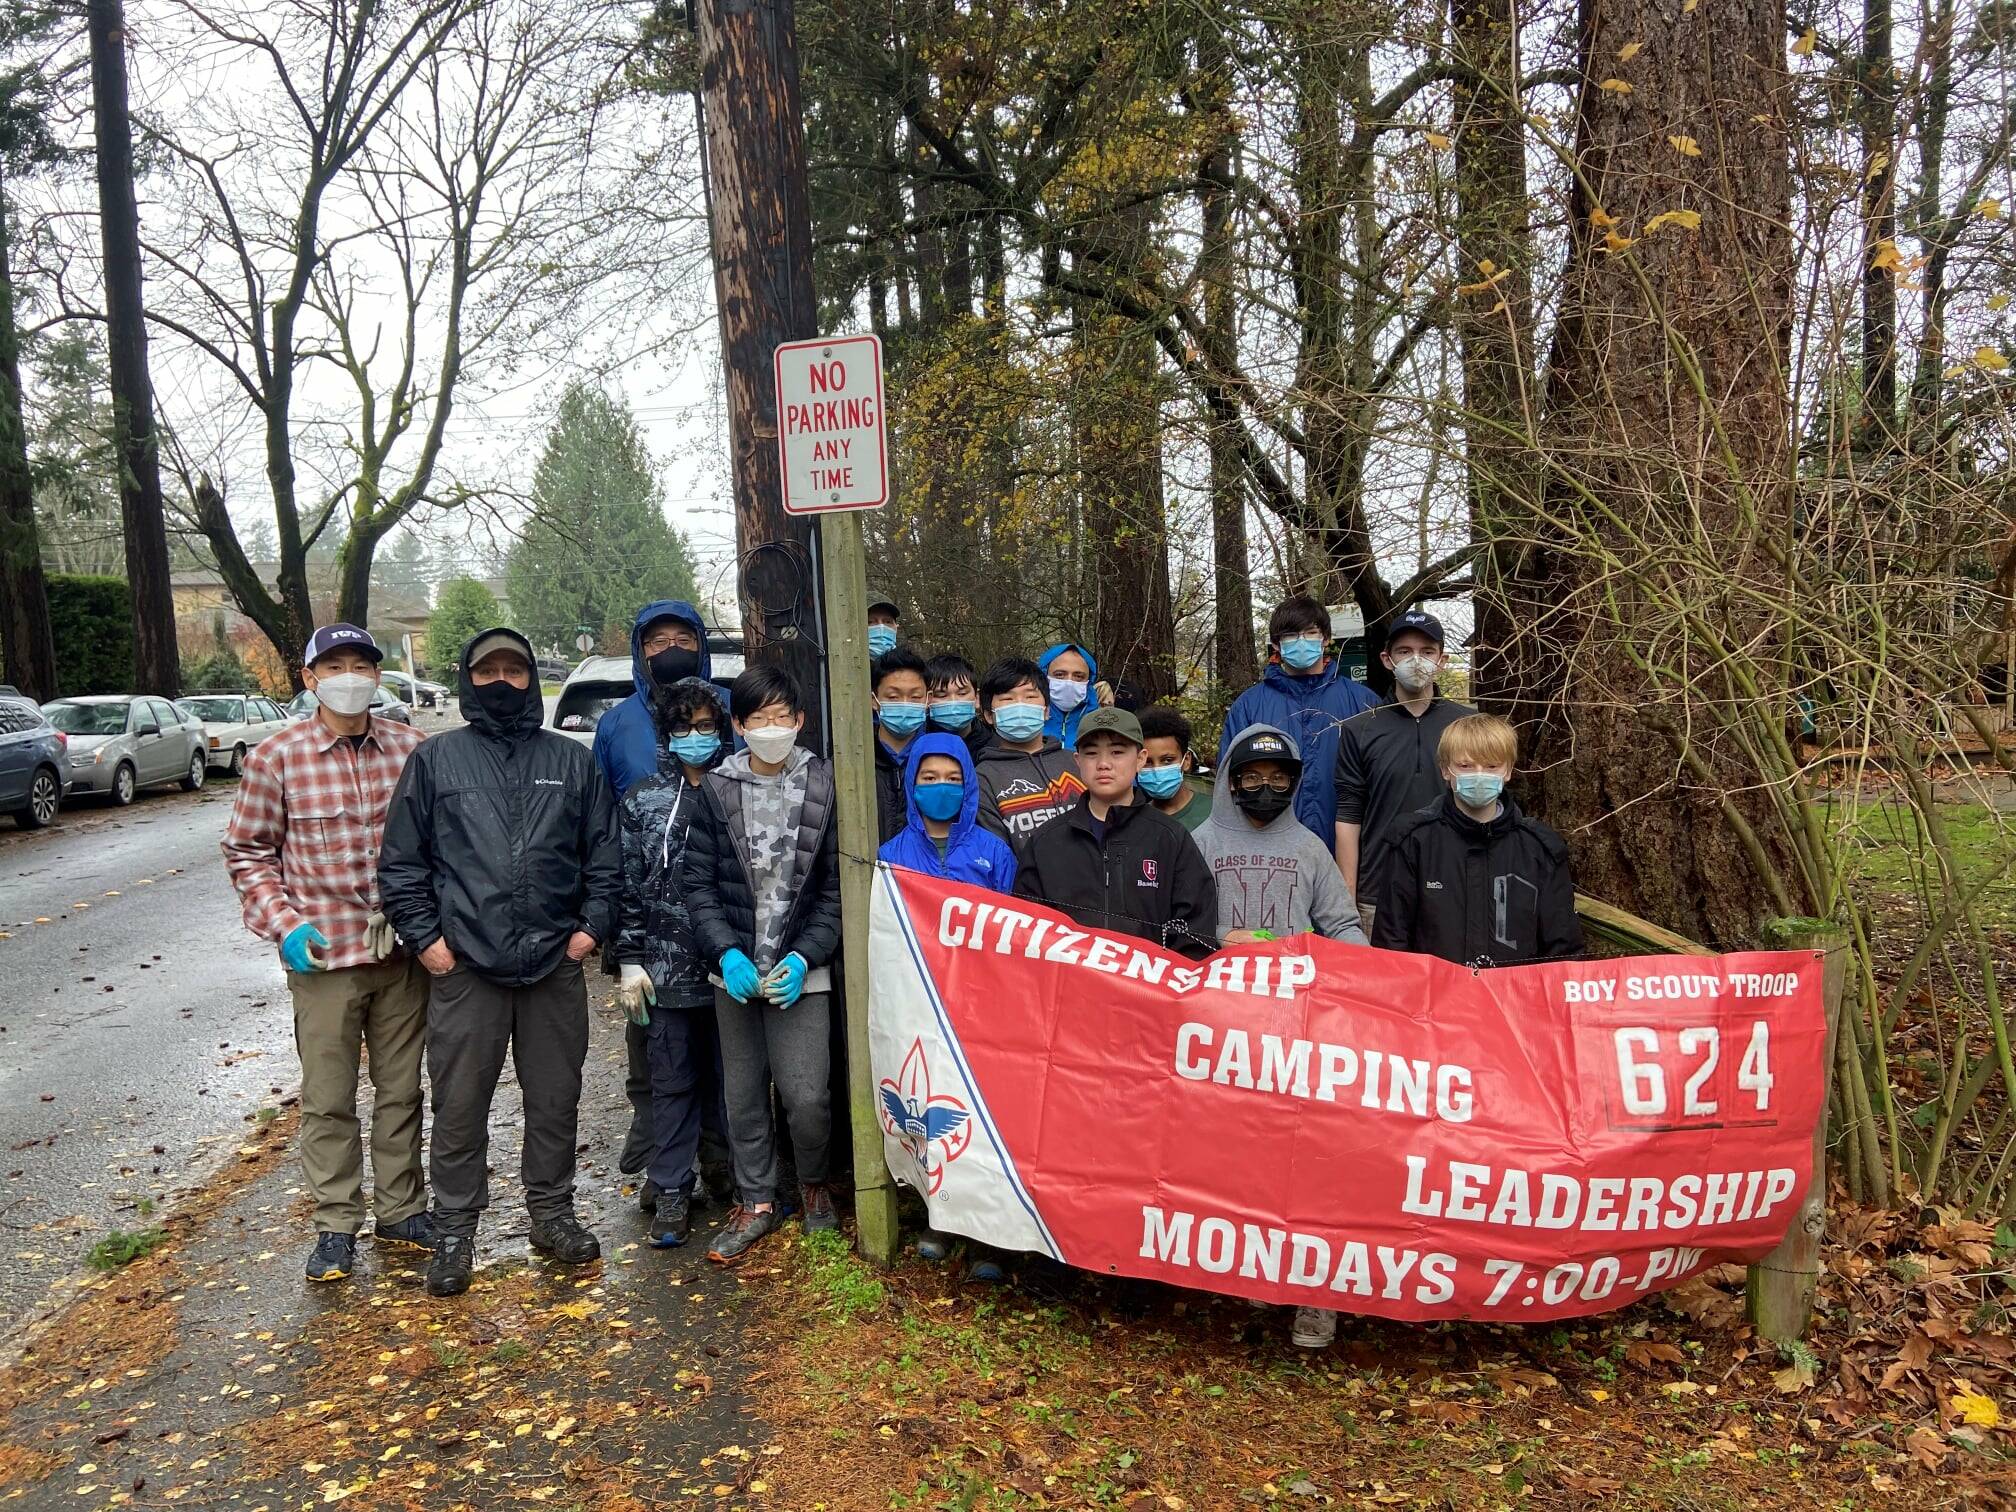 Mercer Island Boy Scout Troop 624 recently braved the rain for a clean-up and planting service project at First Hill Park. Pictured are the scouts with adult leaders: Amani Bergquist, Robert Bergquist, Carolyn Boatsman, Marko Loop, Charles Luu, Milo McJannet, Laszlo, McKenna, Khai McMullan, Brenden Nago, Drew Ogata, Randy Ogata, Neil Pandya, Chirag Pandya, Yul Park, Andrew Park, Kyle Ritchie (top row, far right), Matthew Strong, Michael Strong and Randy Xu. Courtesy photo